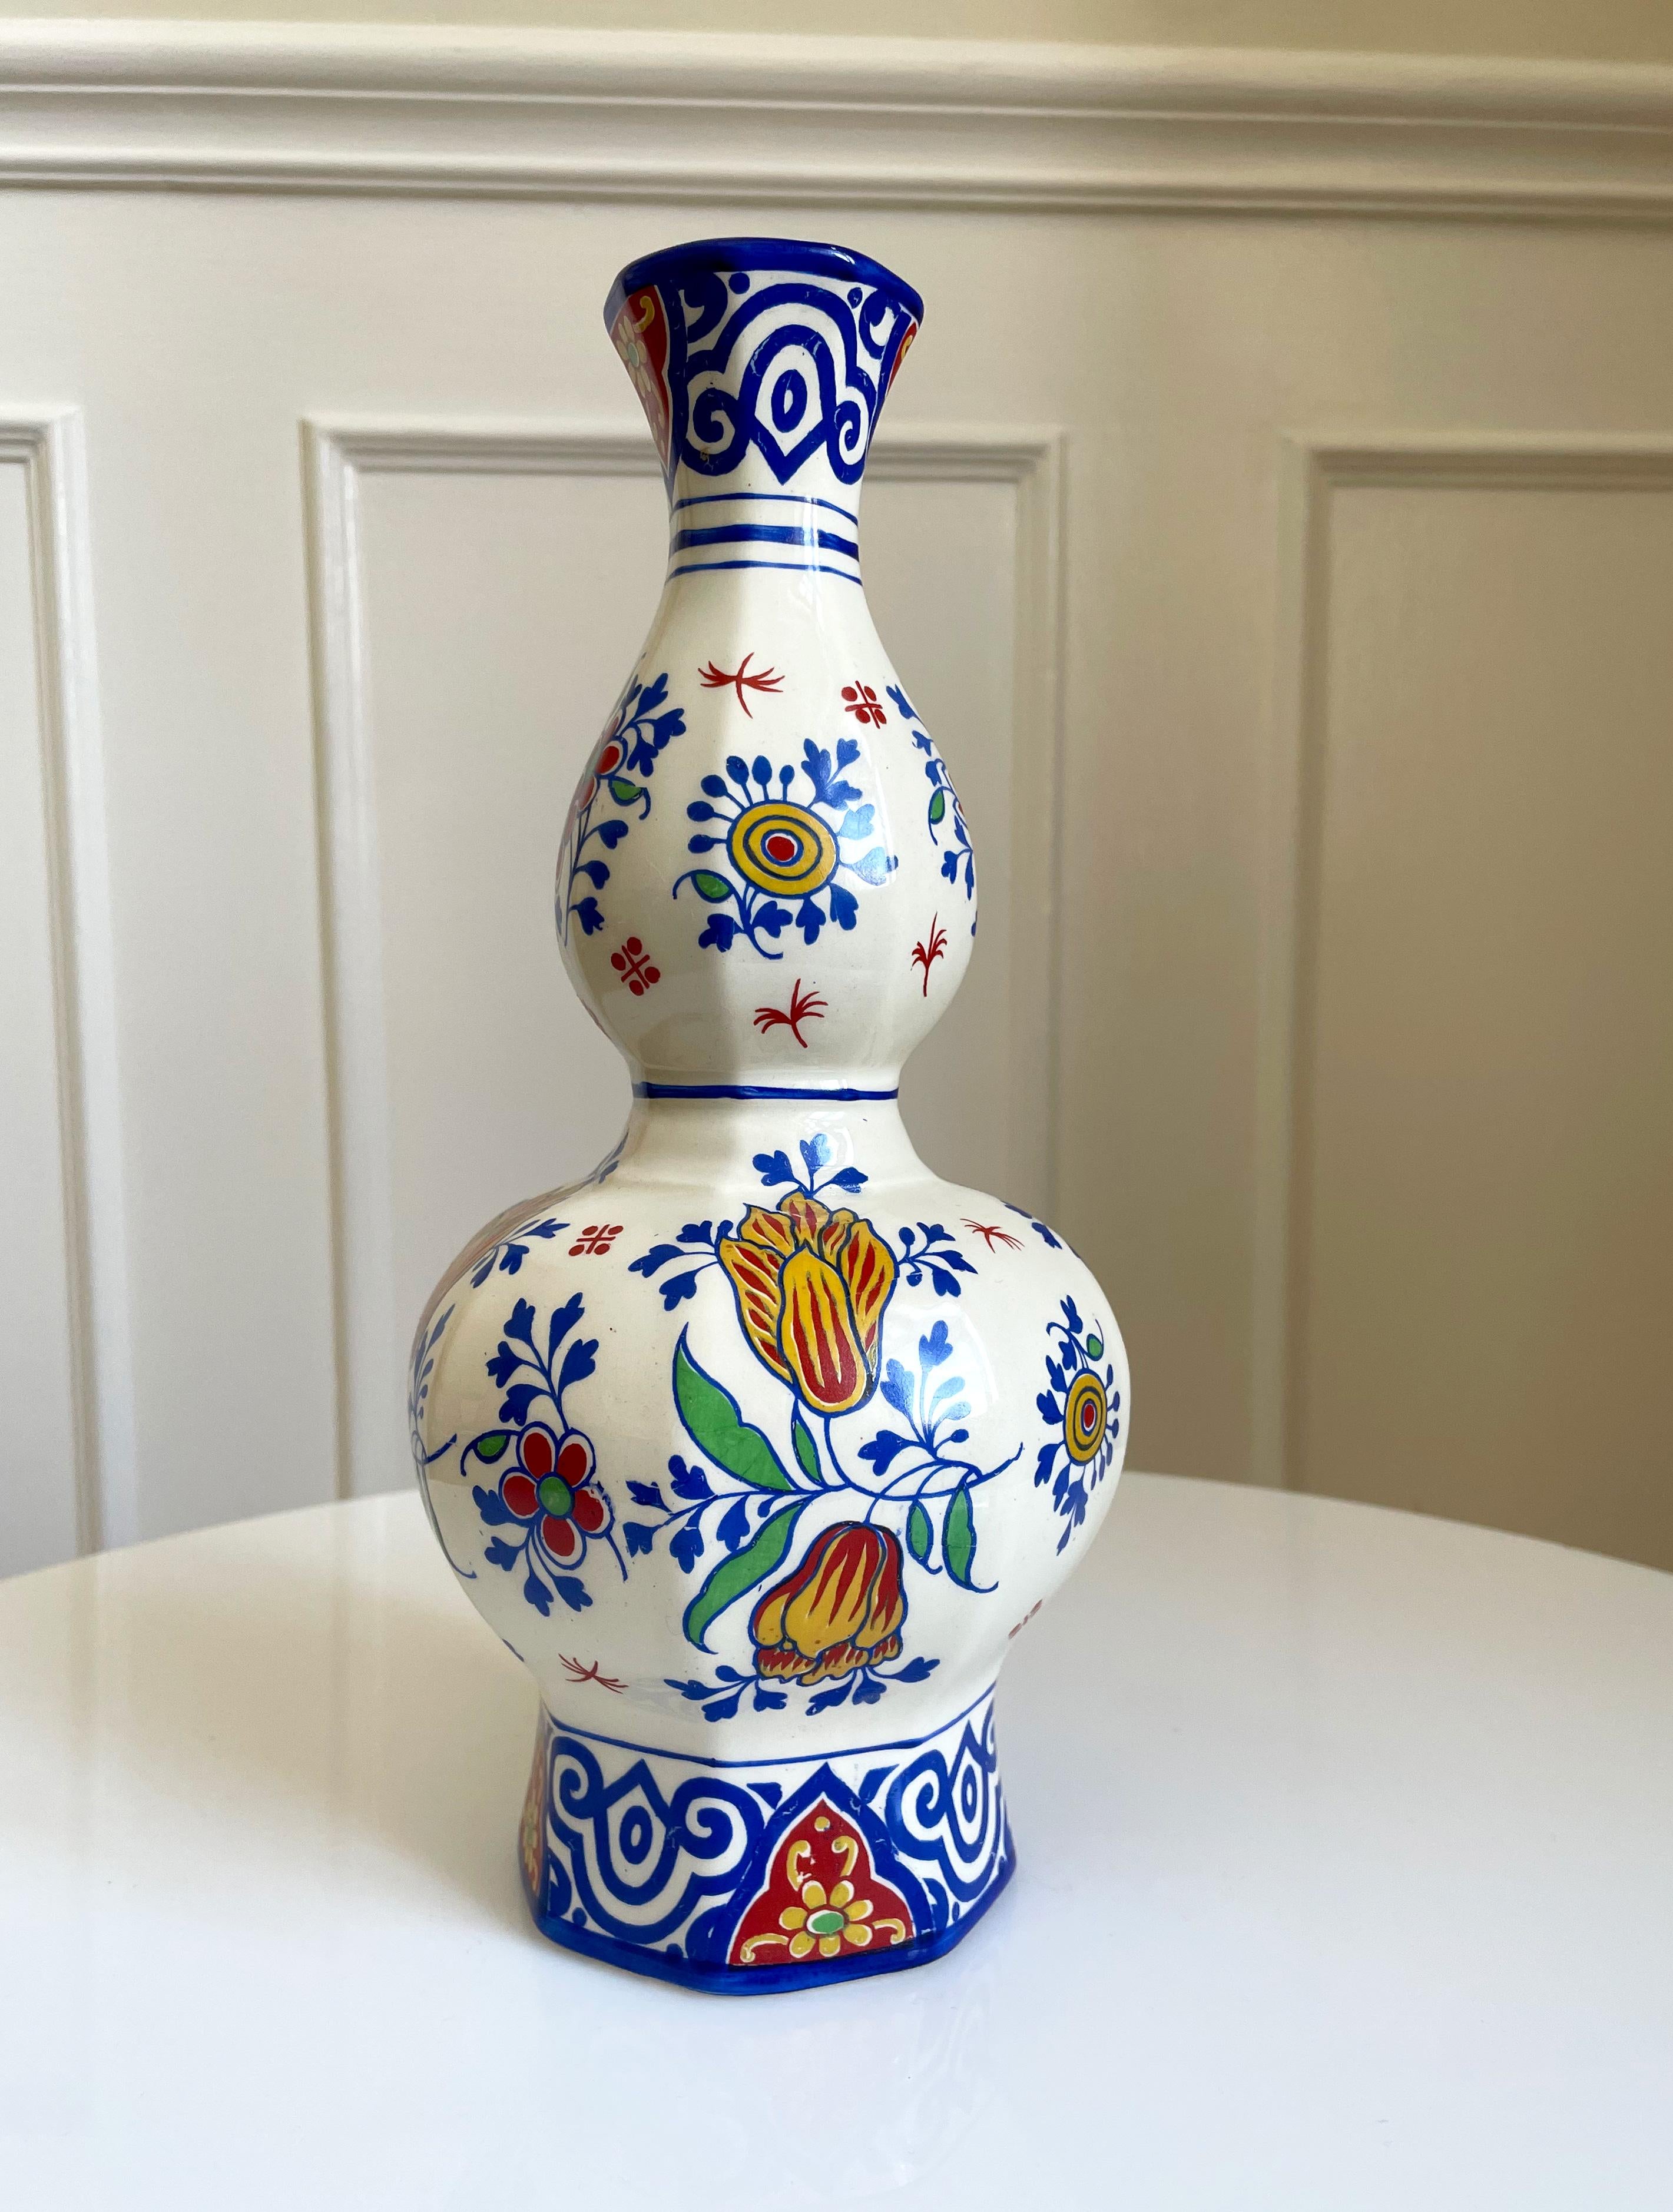 Colorful 100 year old Belgian Art Nouveau delft faience knobble vase by Charles Catteau's Boch Fréres Keramis at La Louviére, Belgium in the 1920s. Hand painted flowers, leaves and organic patterns in vibrant blue, red, yellow and green colors on